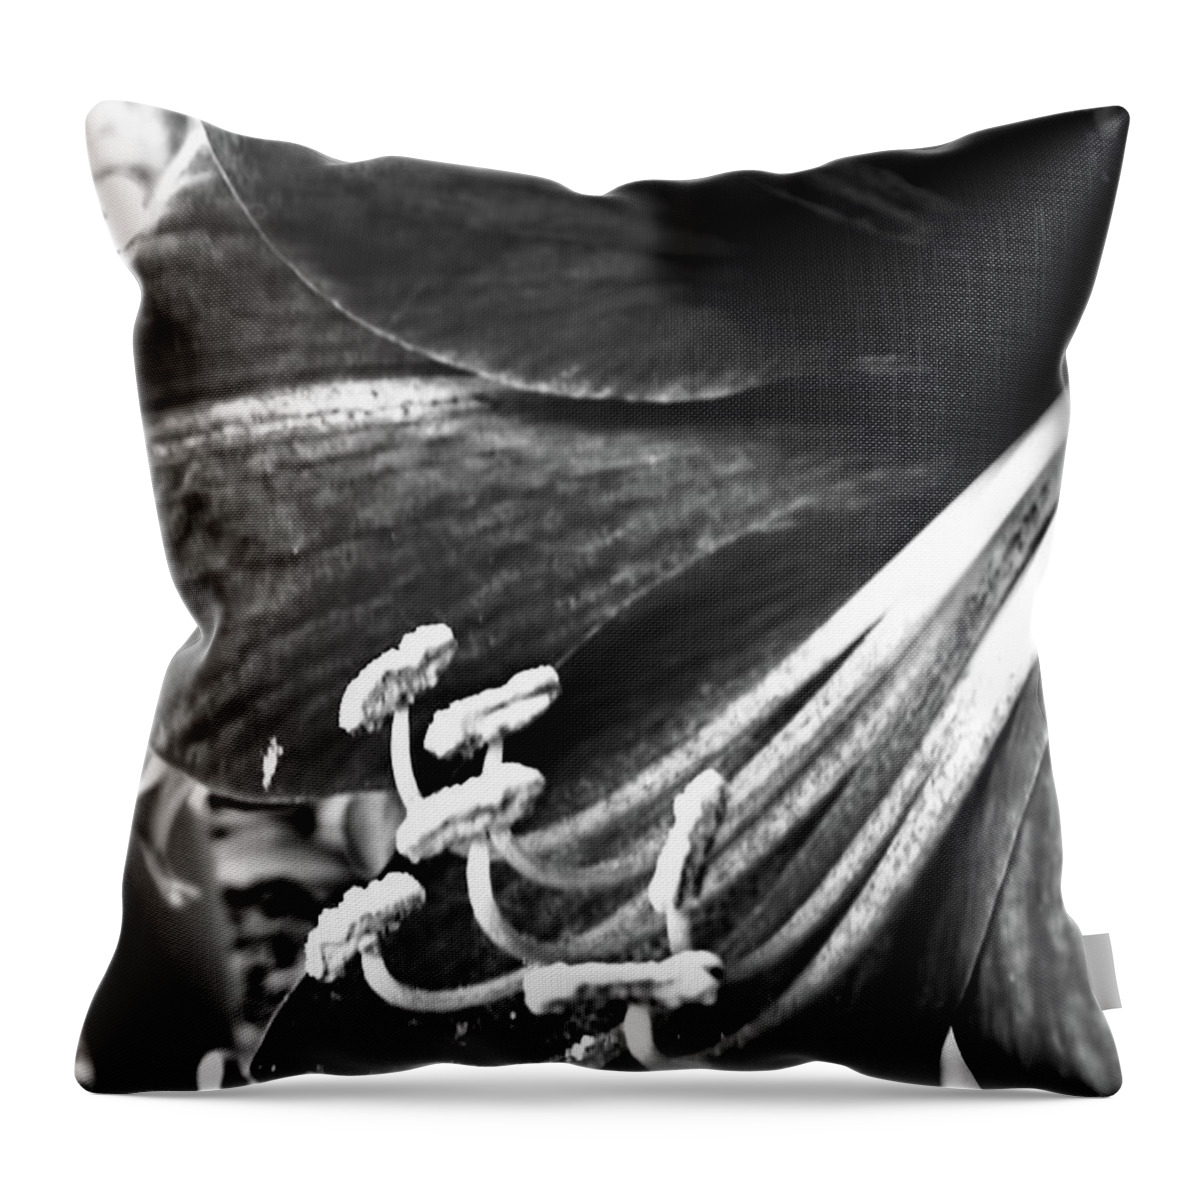 Amaryllis Throw Pillow featuring the digital art Black And White Amaryllis by D Hackett